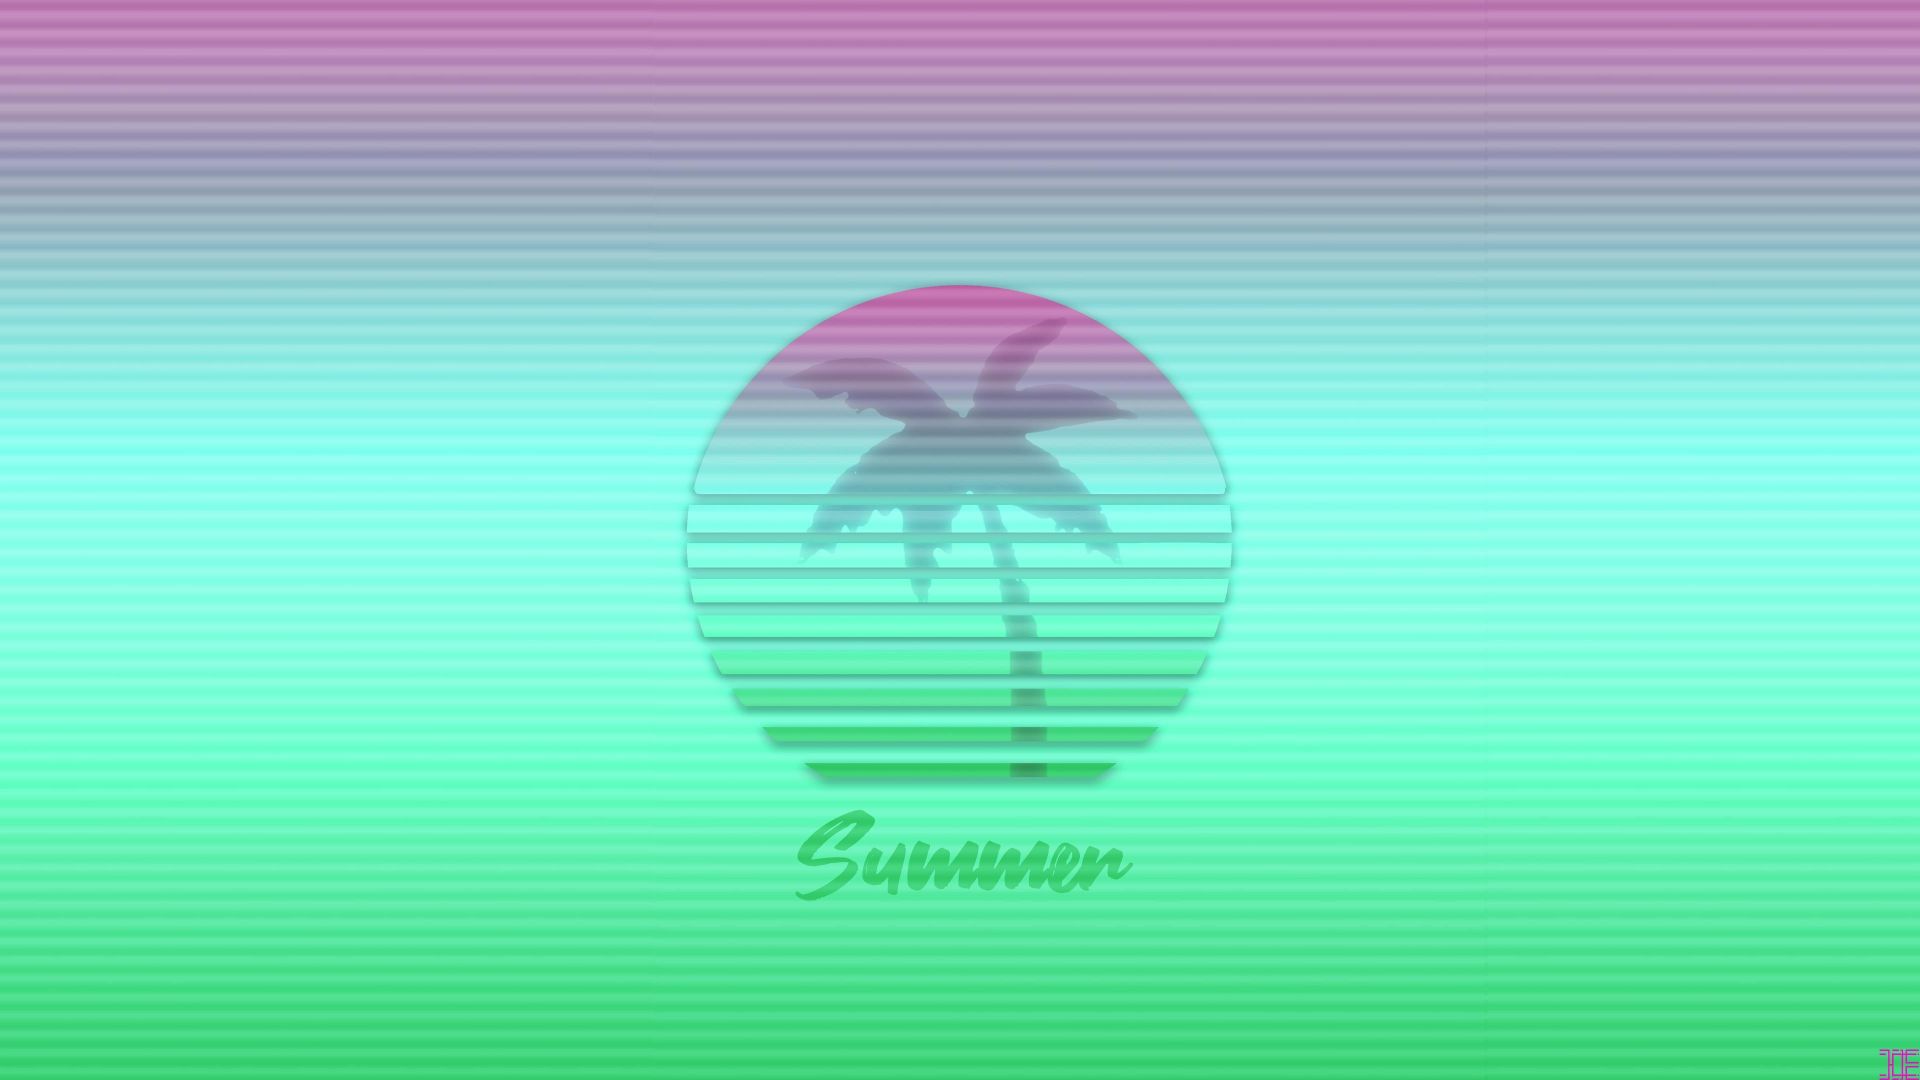 Summer Vibes Outrun Themed wallpaper in 1920x1080 resolution